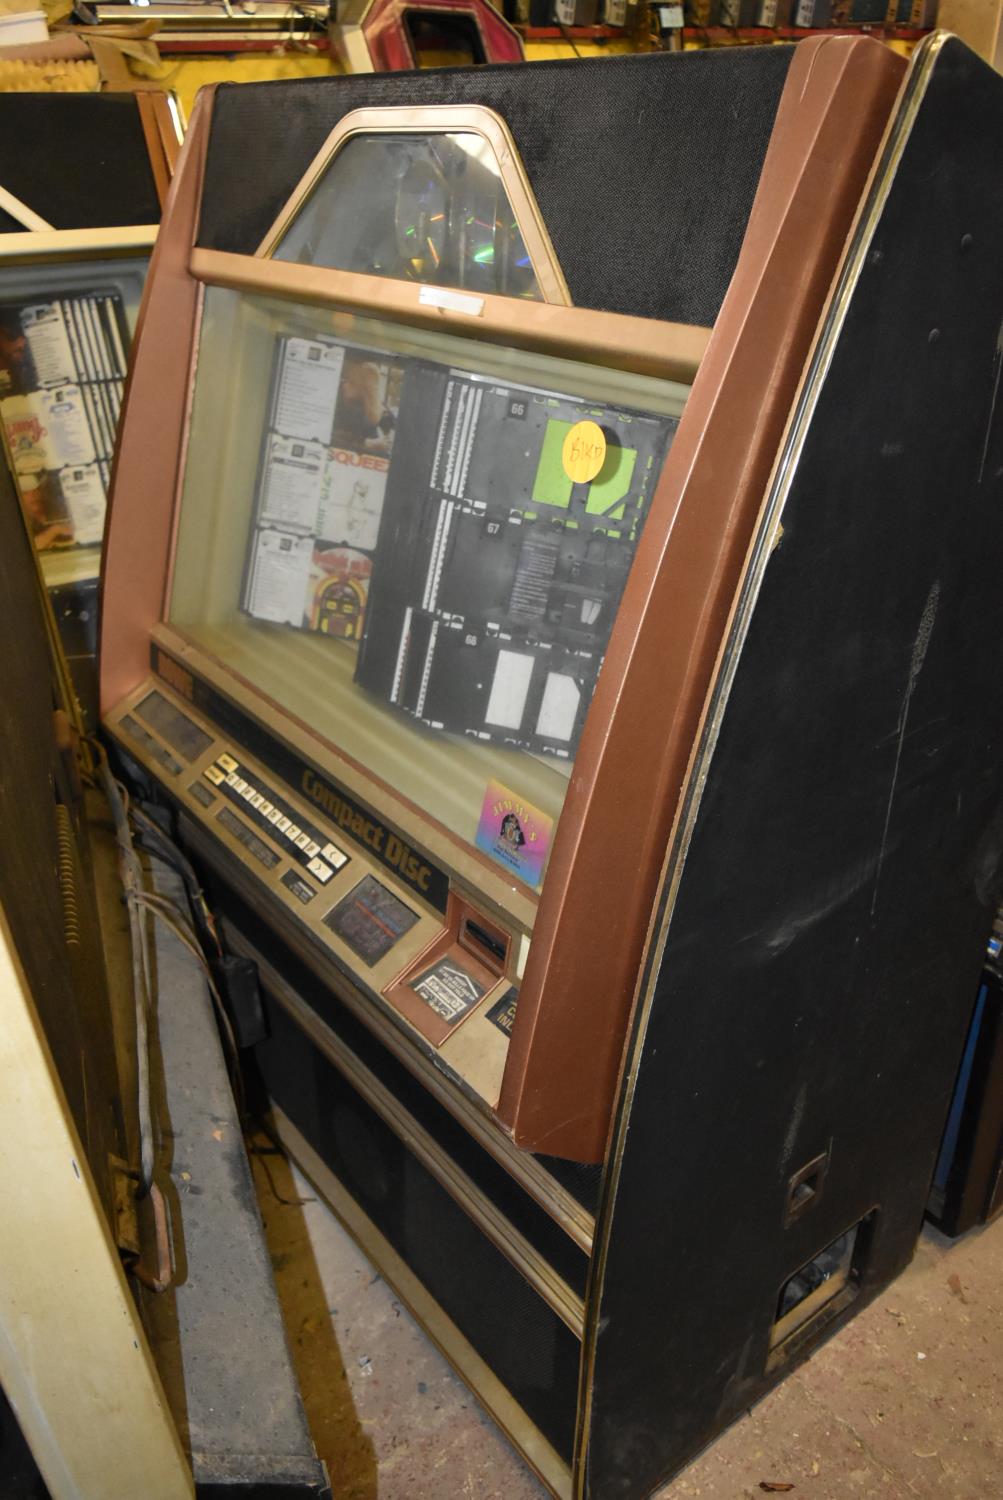 Rowe Ami 100 CD jukebox holding 100 CD's. U.S import. Complete but untested. It may be possible